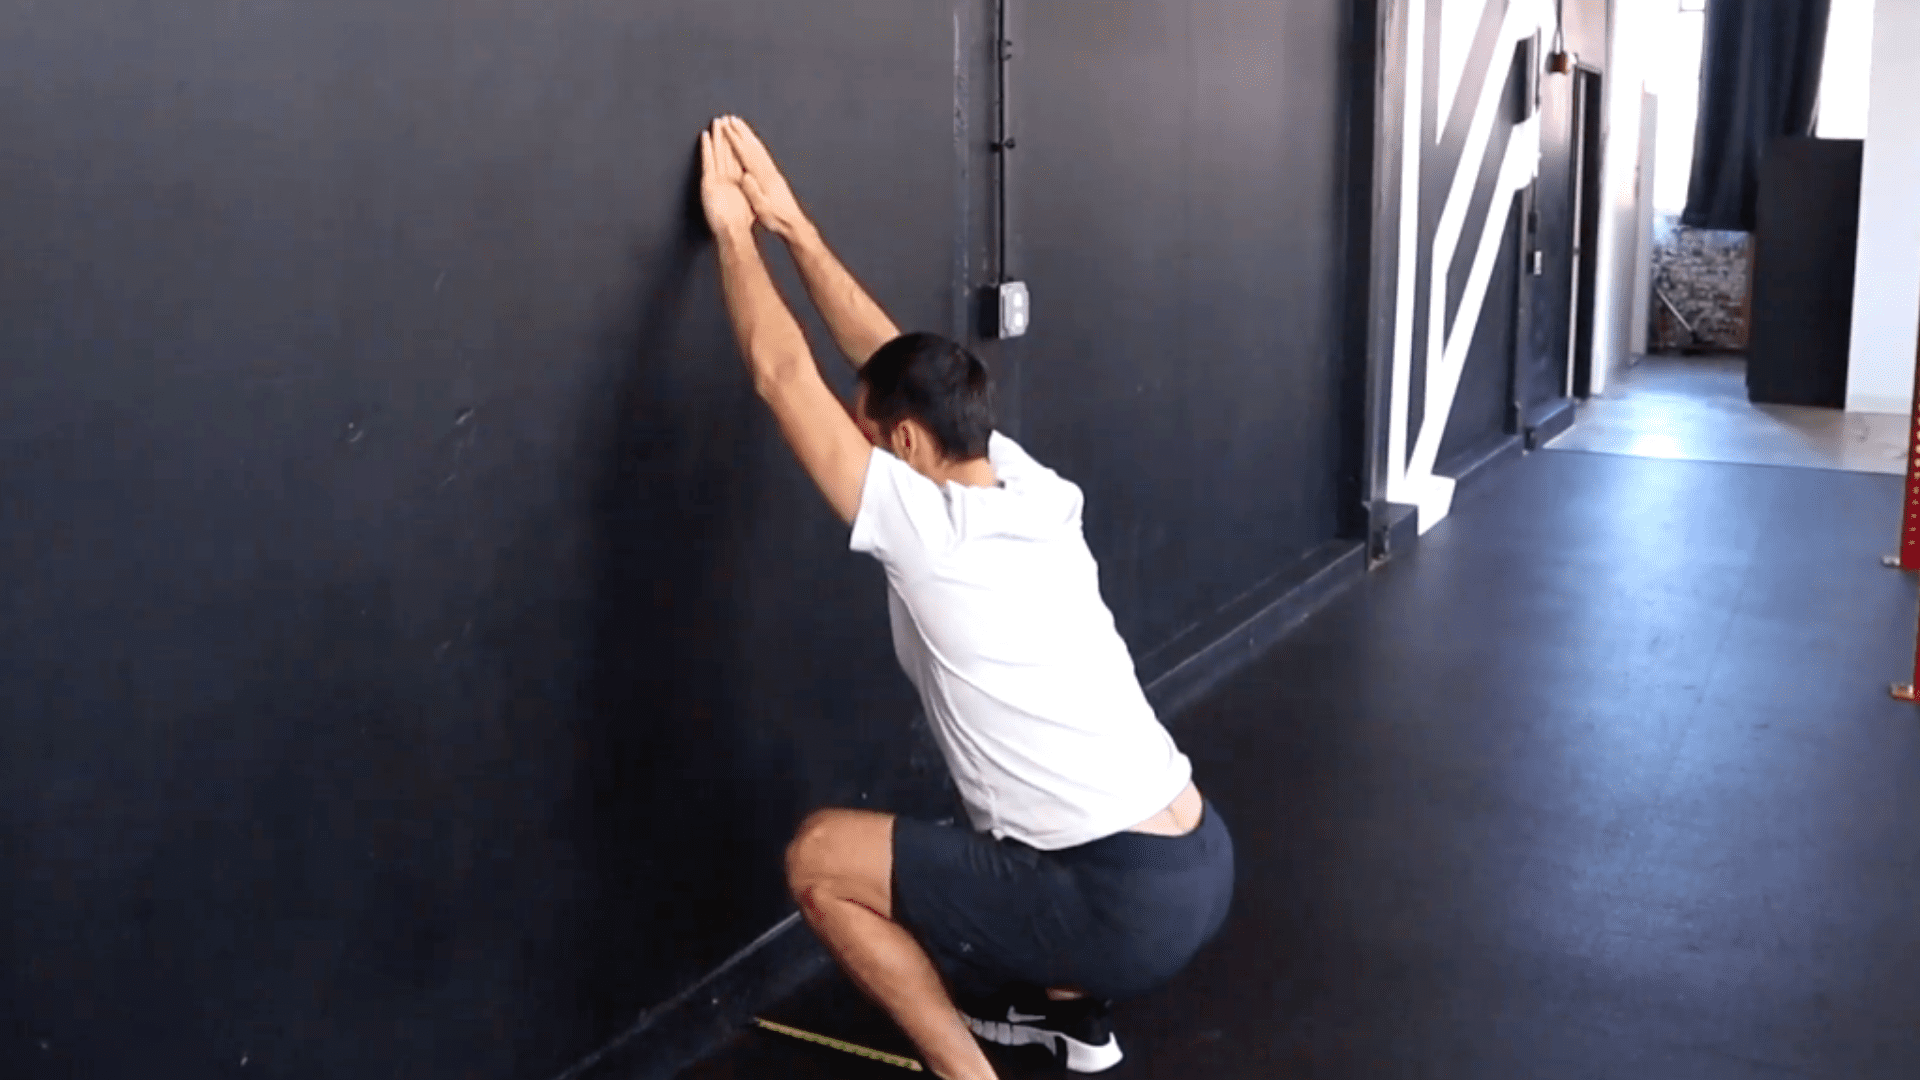 A person performs the squat therapy assessment.